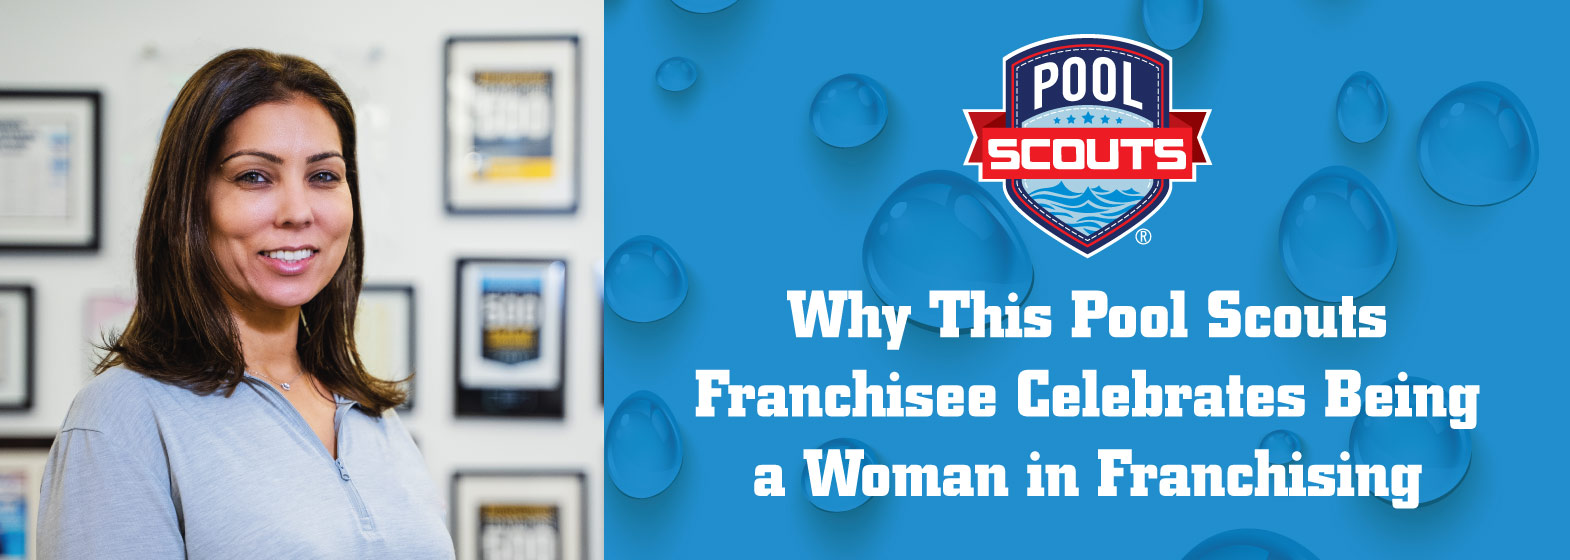 Image of Why This Pool Scouts Franchisee Celebrates Being a Woman in Franchising